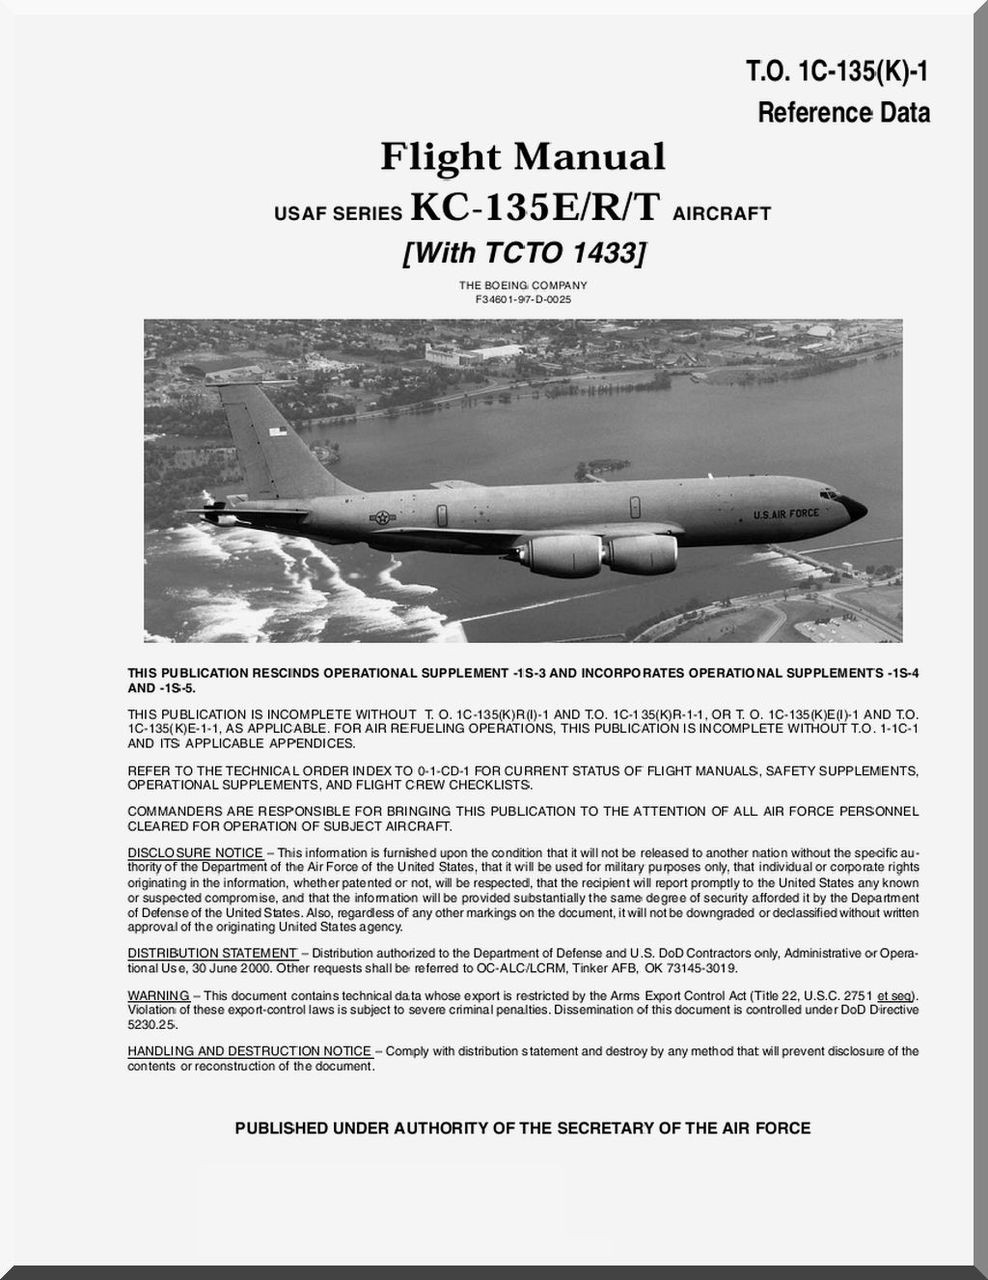 Boeing Kc 135 E R T Aircraft Flight Manual T O 1c 135 K 1 Reference Data Aircraft Reports Aircraft Manuals Aircraft Helicopter Engines Propellers Blueprints Publications